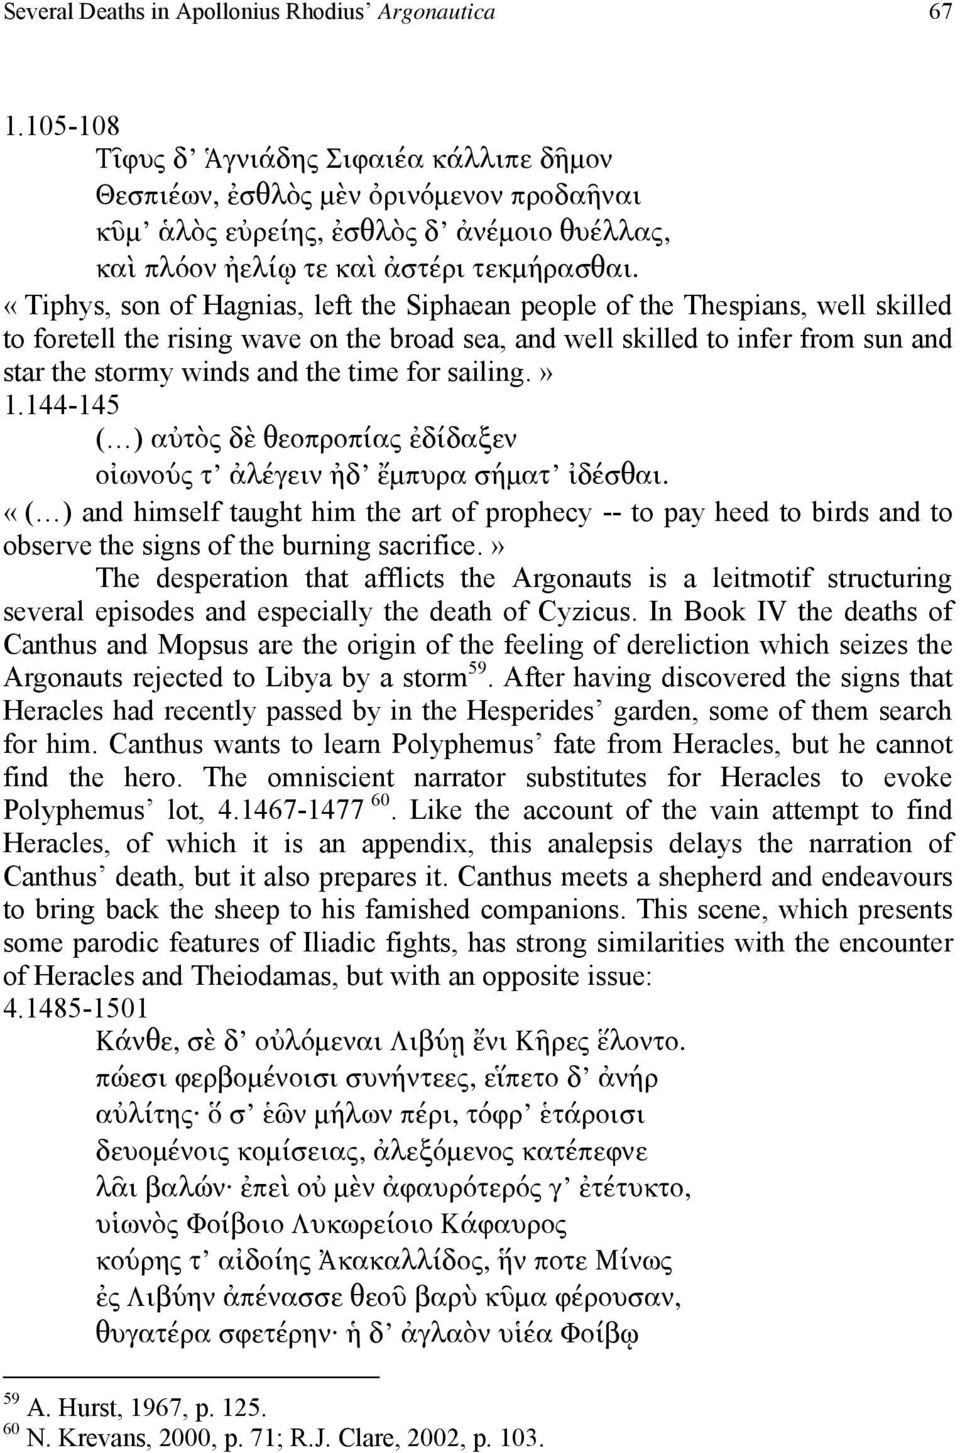 «Tiphys, son of Hagnias, left the Siphaean people of the Thespians, well skilled to foretell the rising wave on the broad sea, and well skilled to infer from sun and star the stormy winds and the